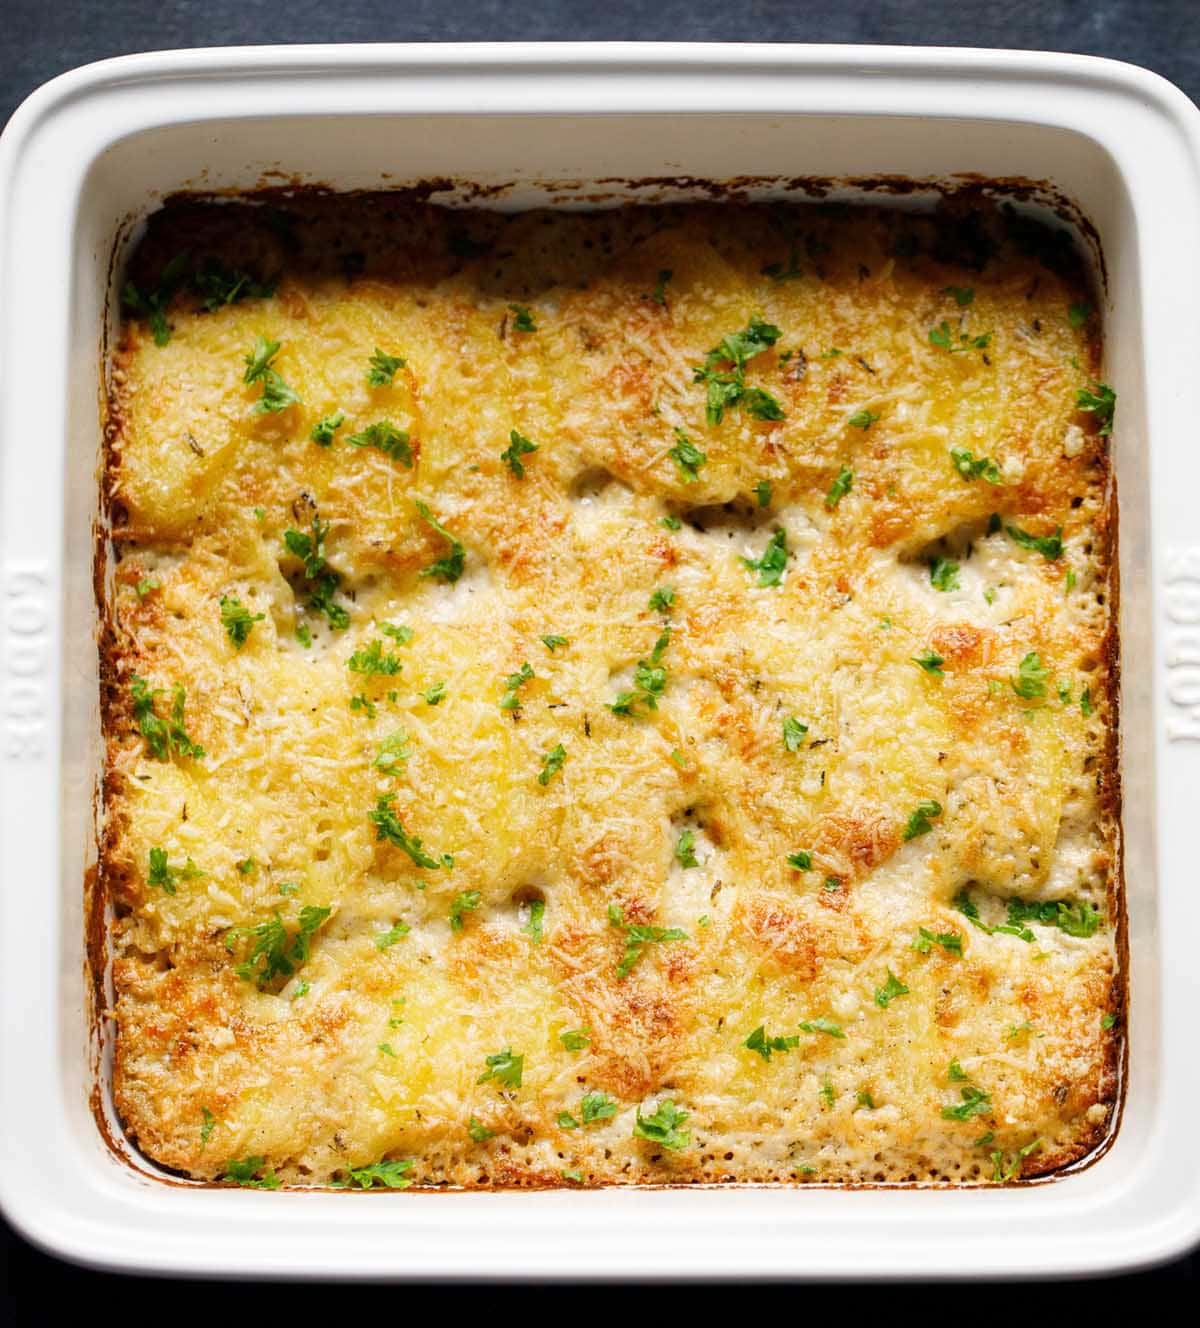 baked potato gratin garnished with parsley in a white baking pan.